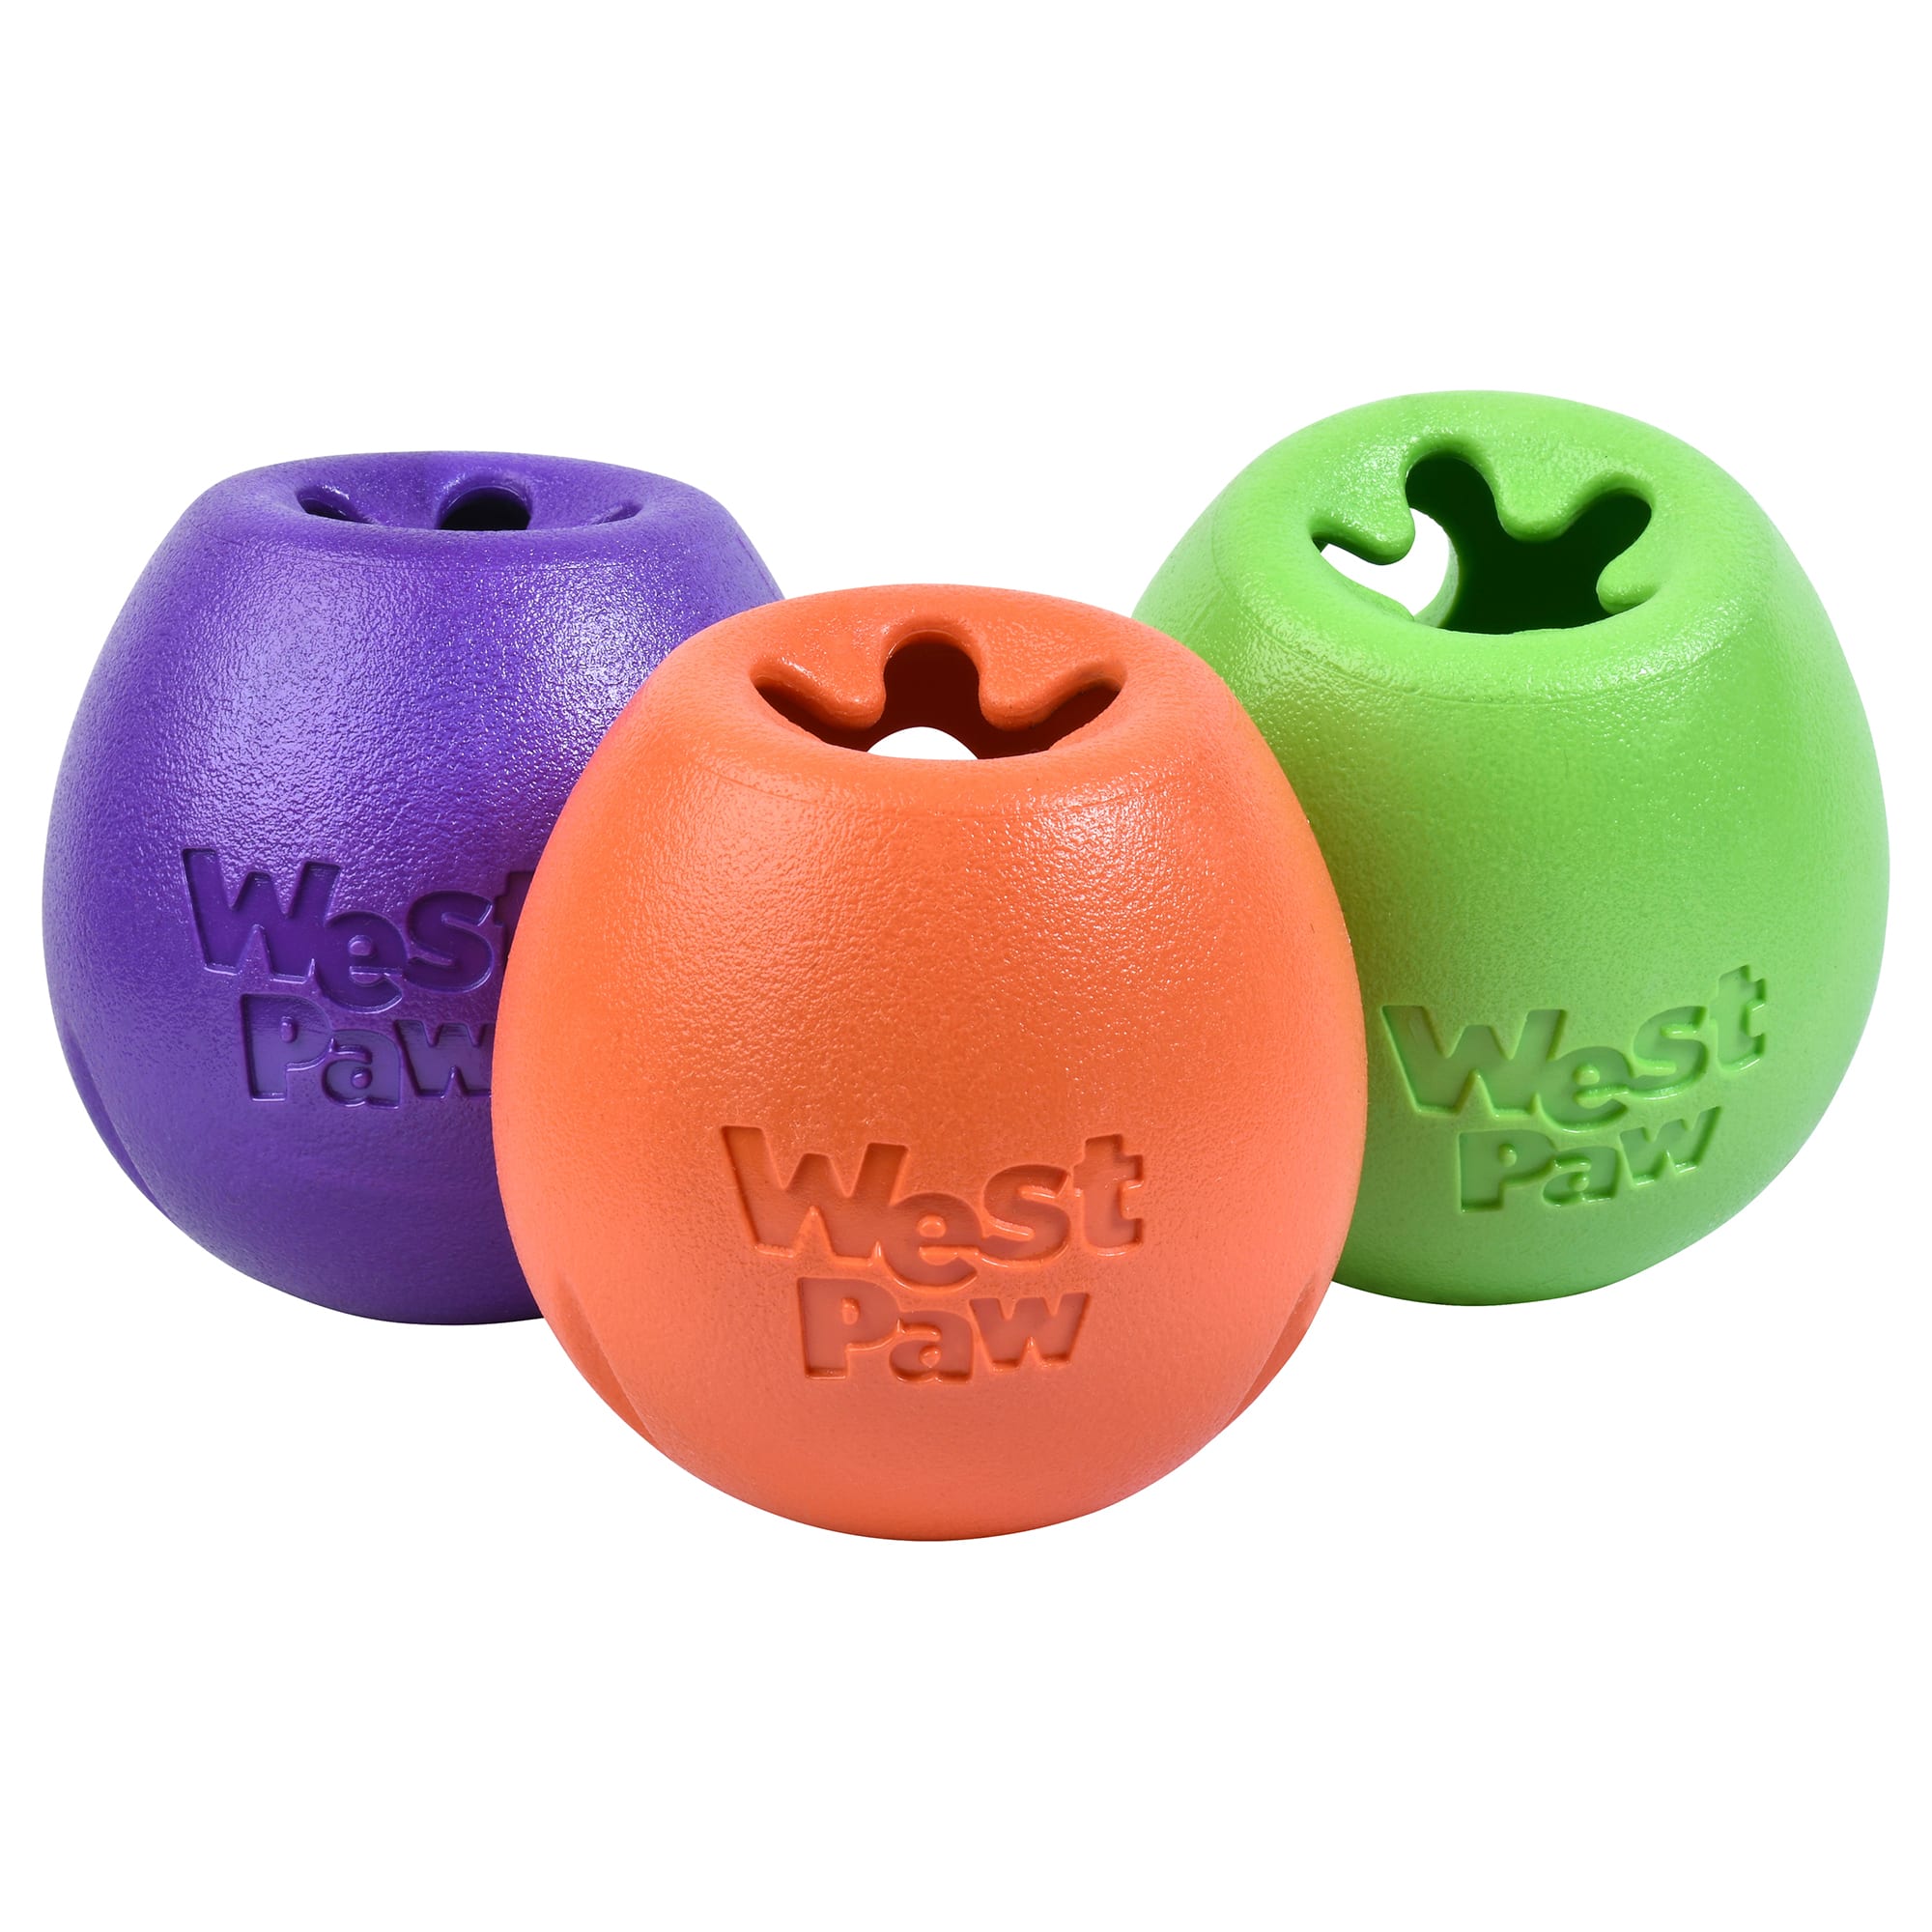 West Paw Rumbl Dog Toy - Melon - Large